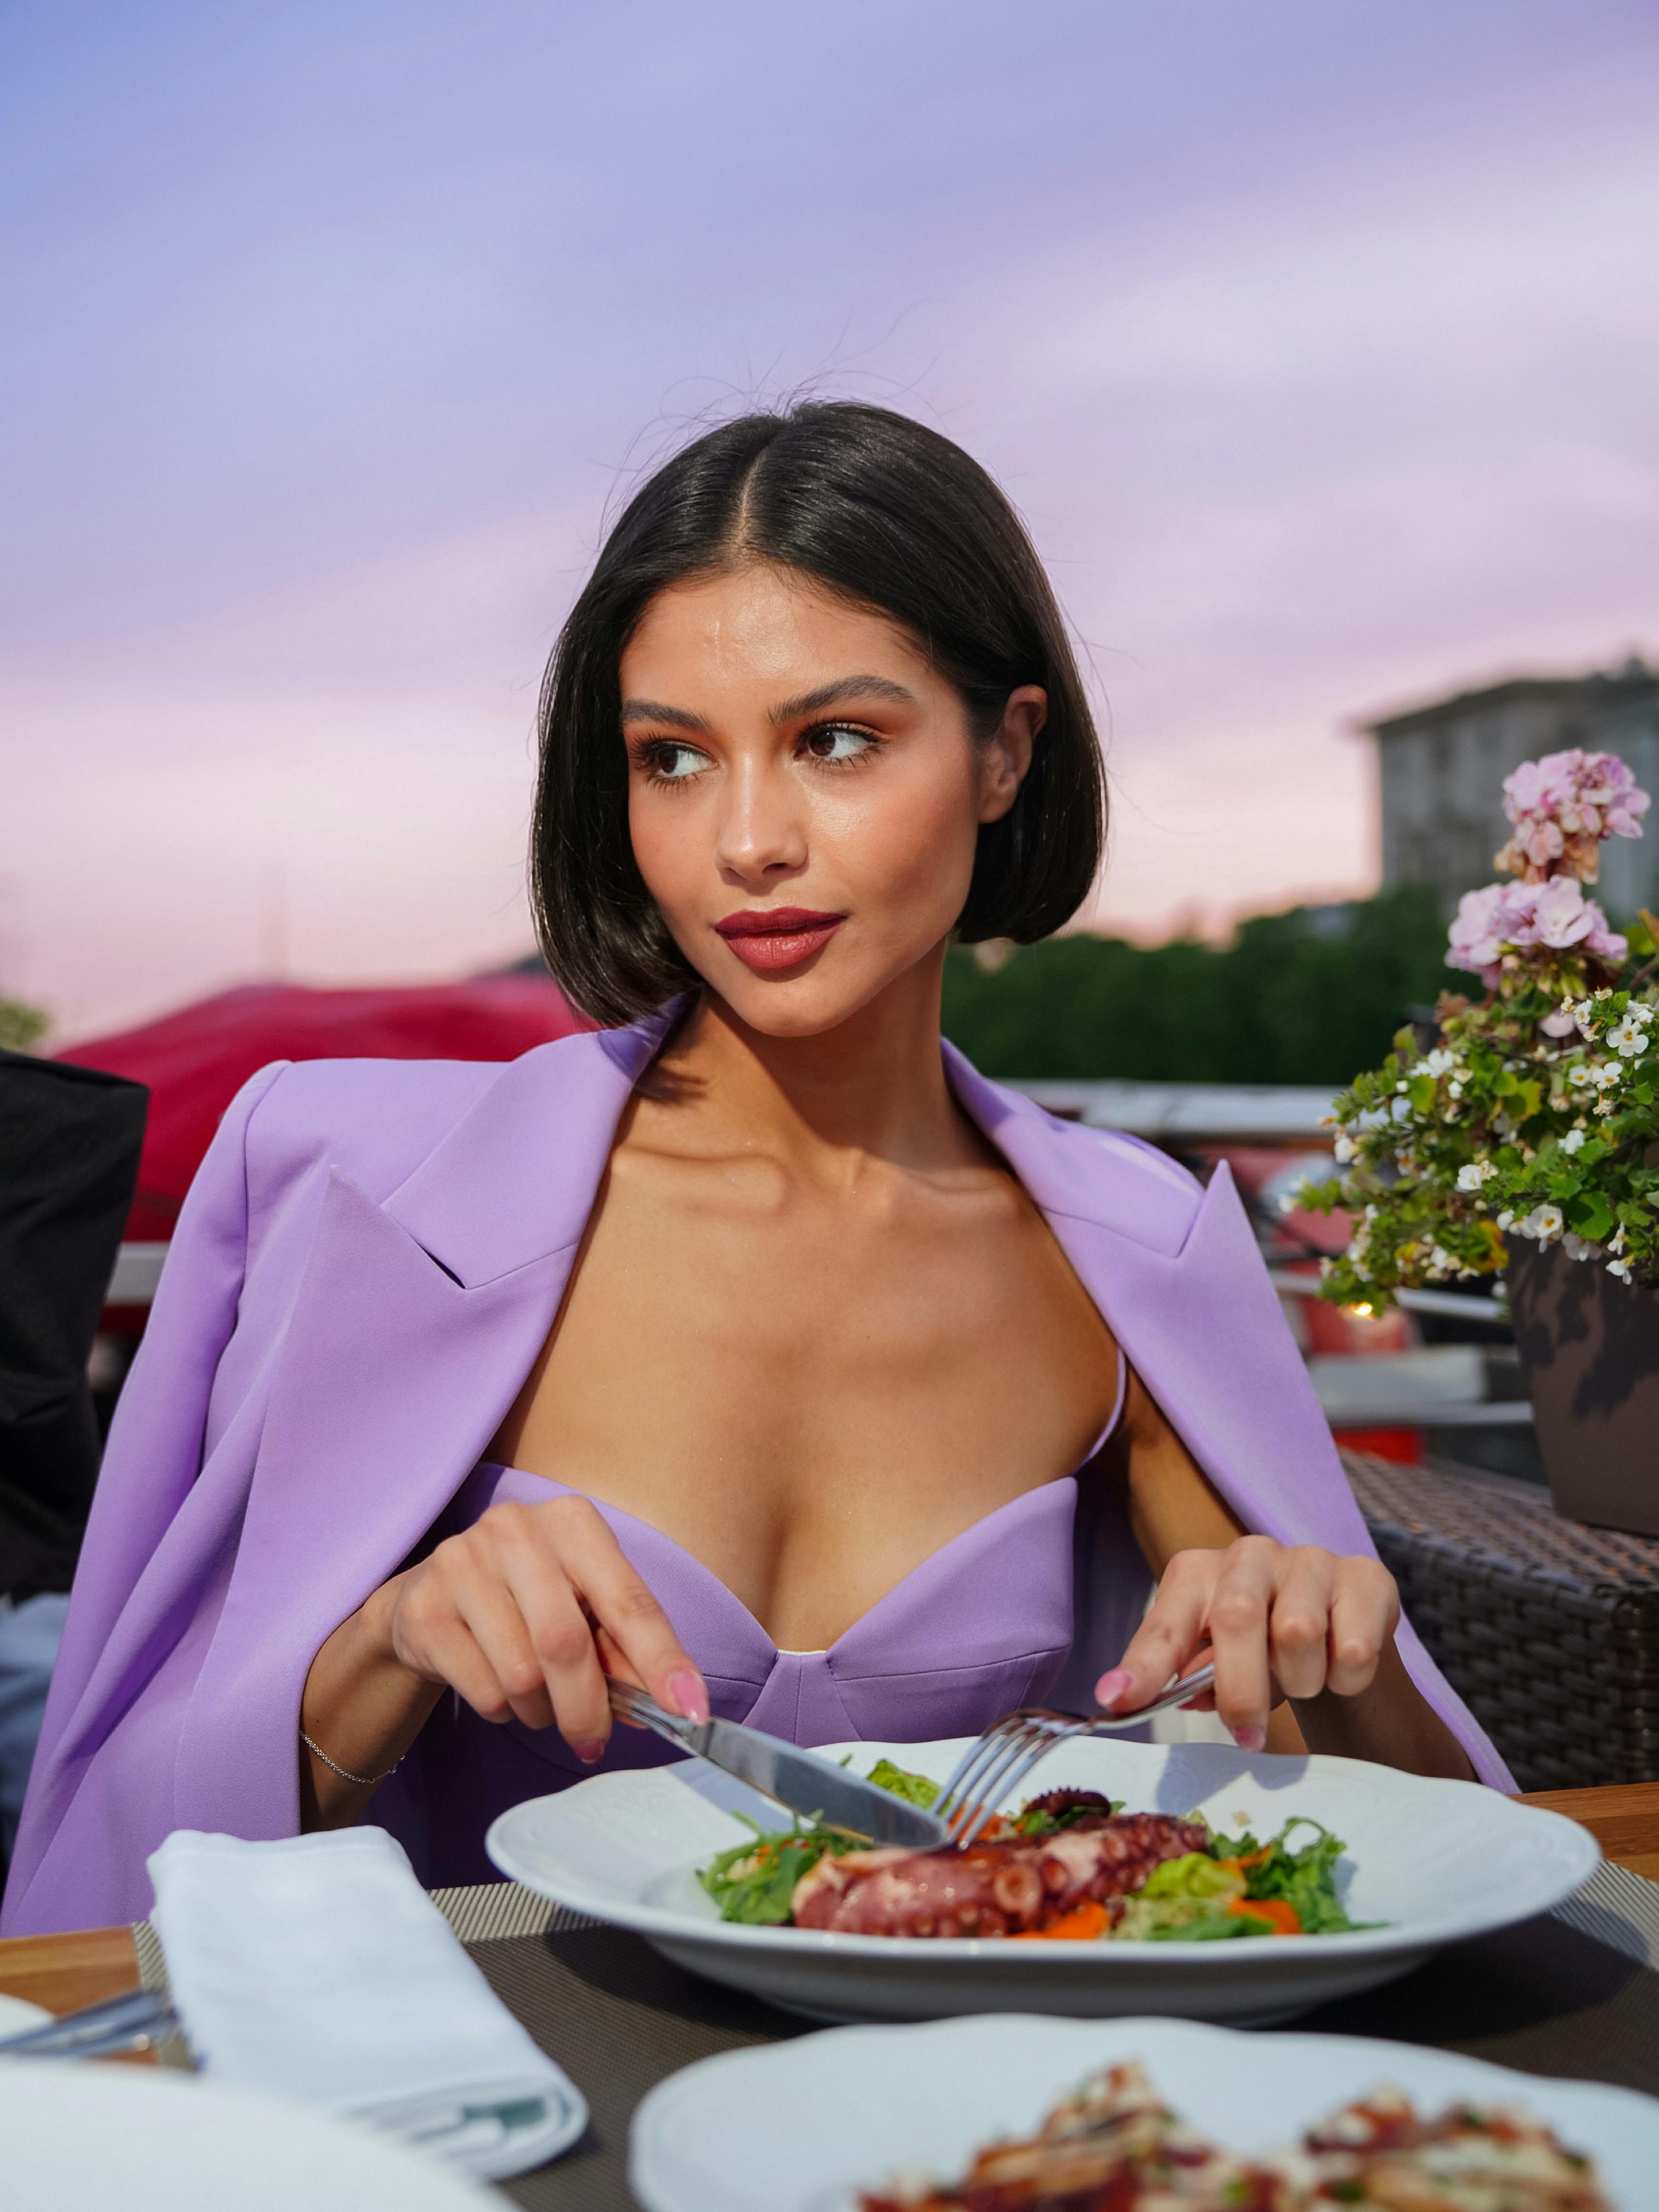 A woman giving off an attitude while eating a meal | Source: Pexels